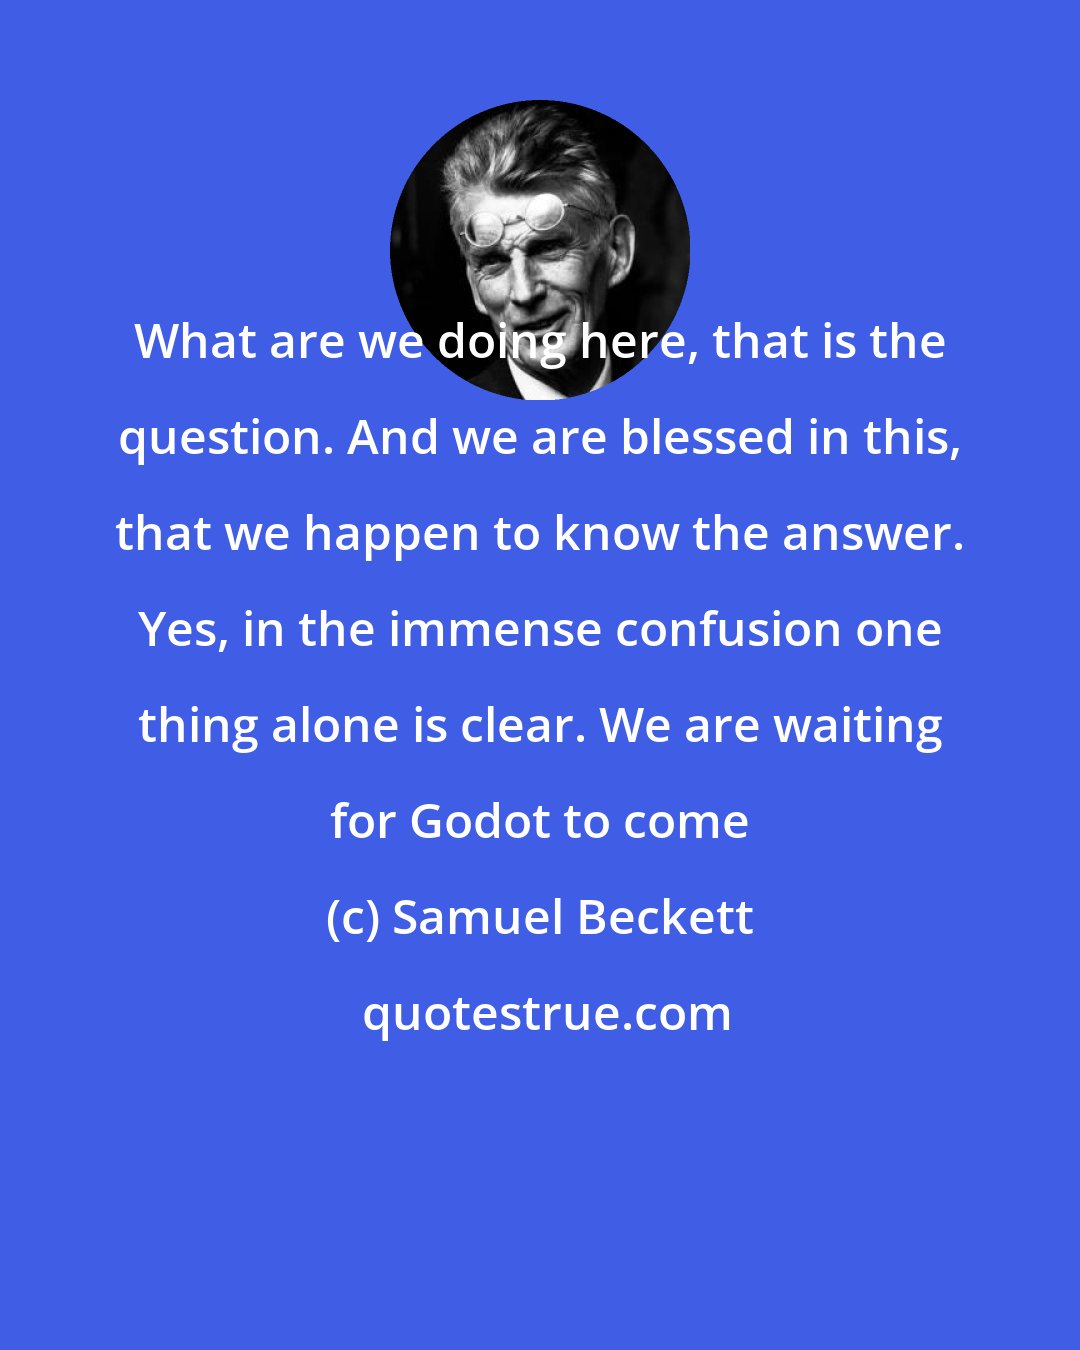 Samuel Beckett: What are we doing here, that is the question. And we are blessed in this, that we happen to know the answer. Yes, in the immense confusion one thing alone is clear. We are waiting for Godot to come